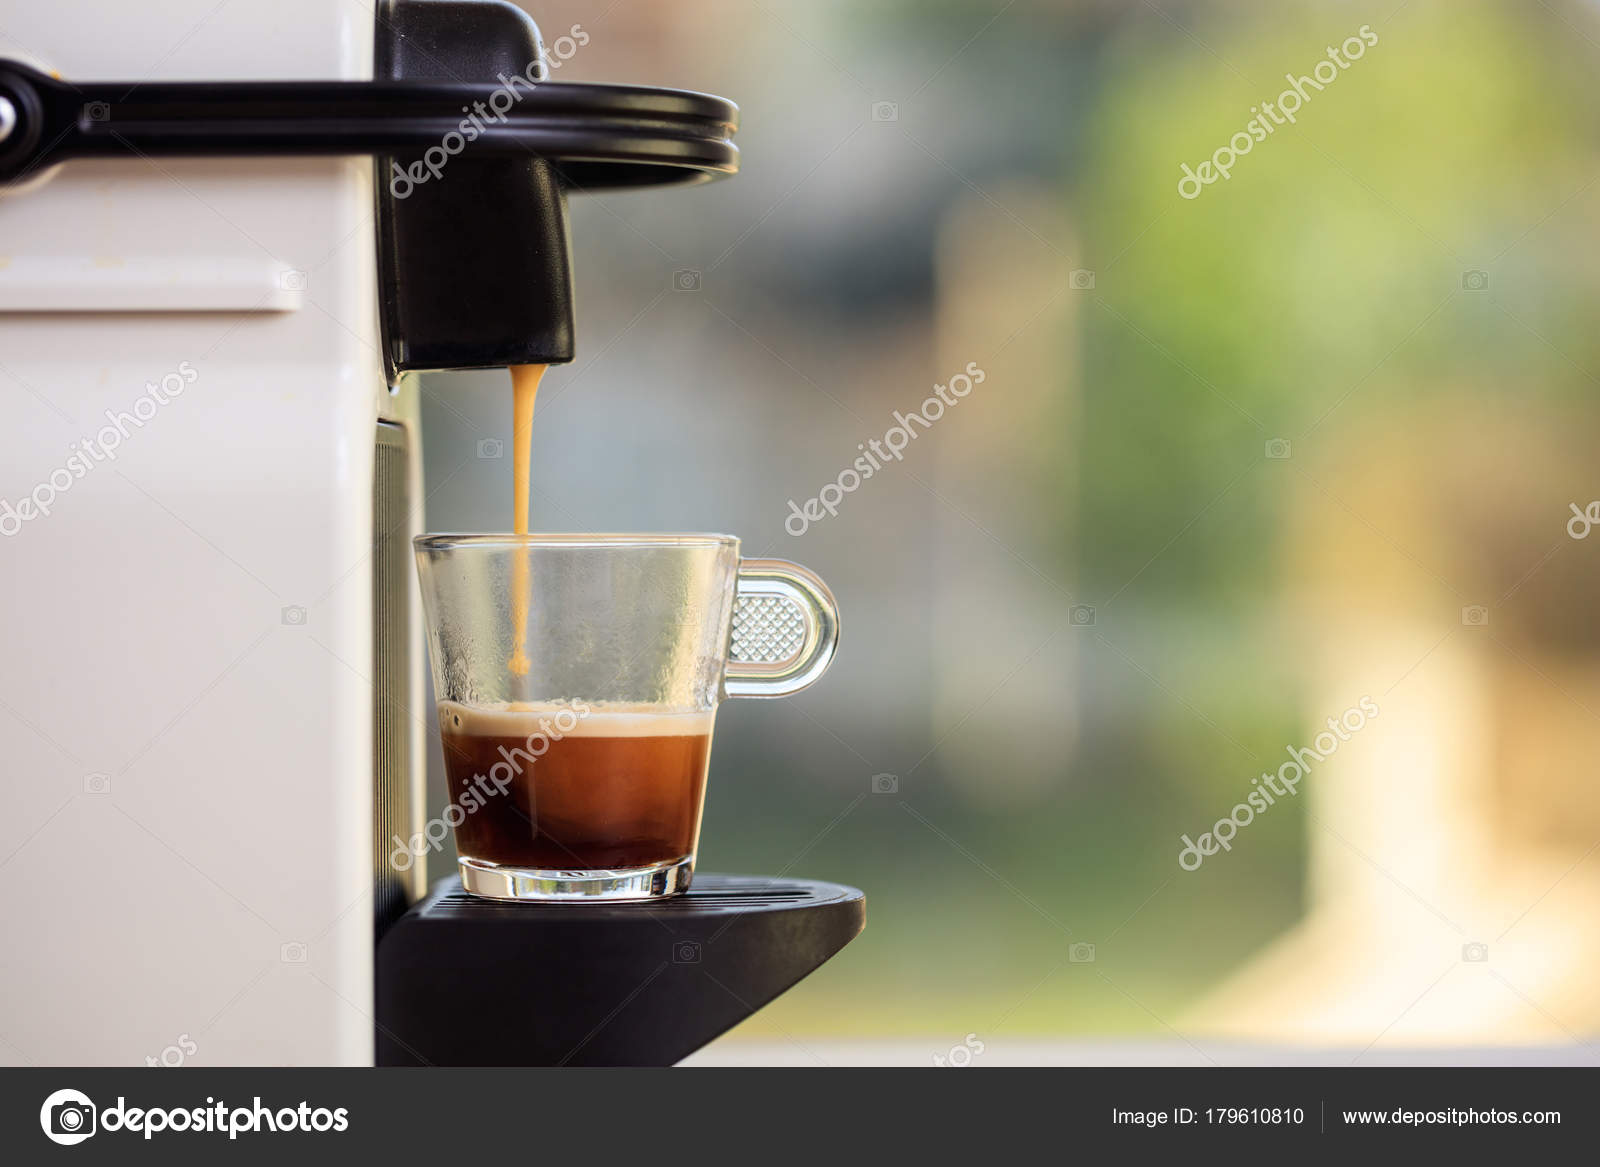 Espresso Coffee Machine On A Blur Green Background Space For Text